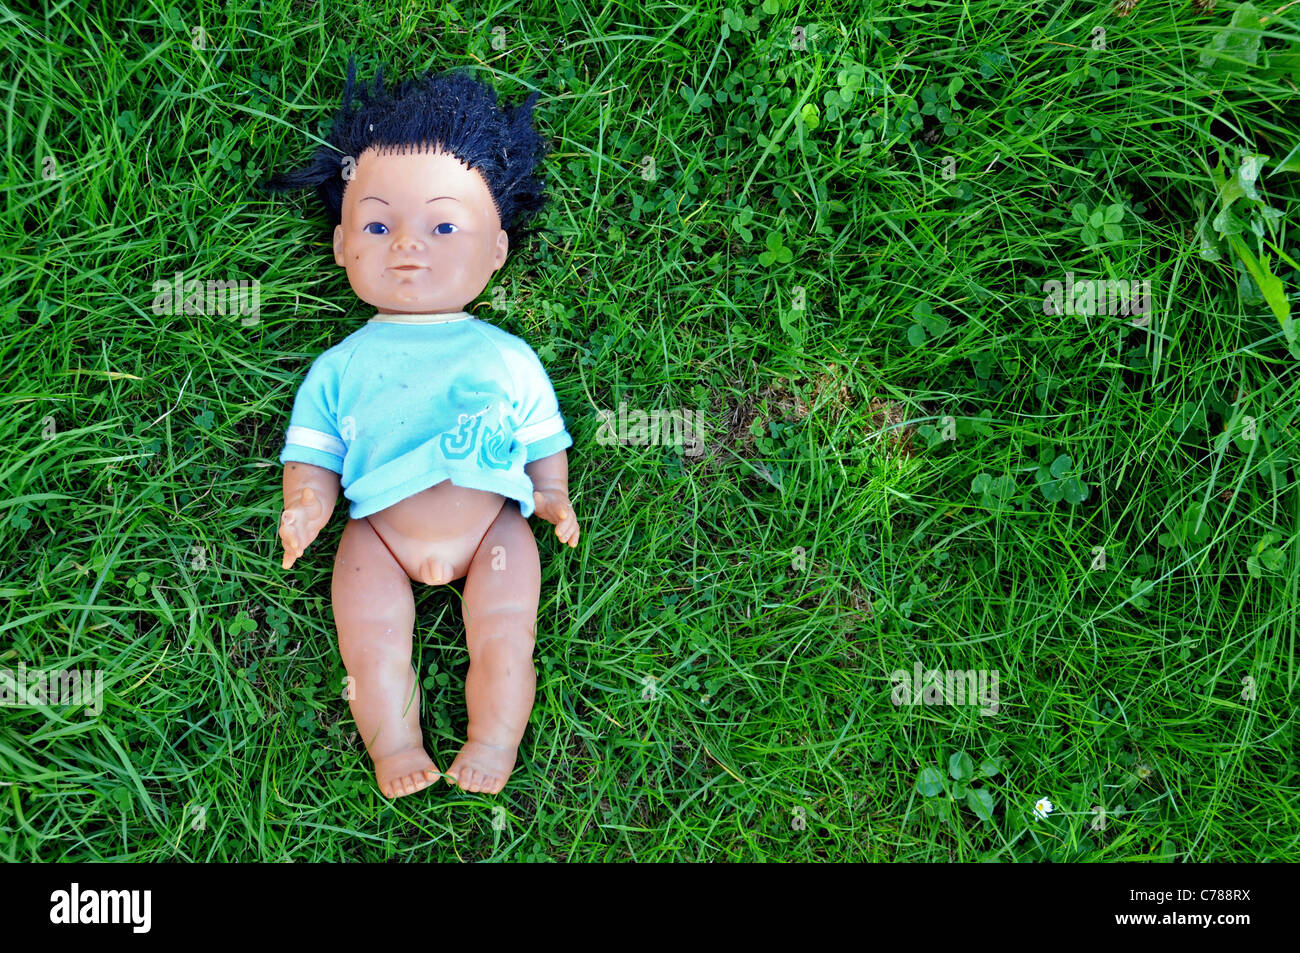 Plastic ethnic male doll abandoned thrown away on grass Stock Photo